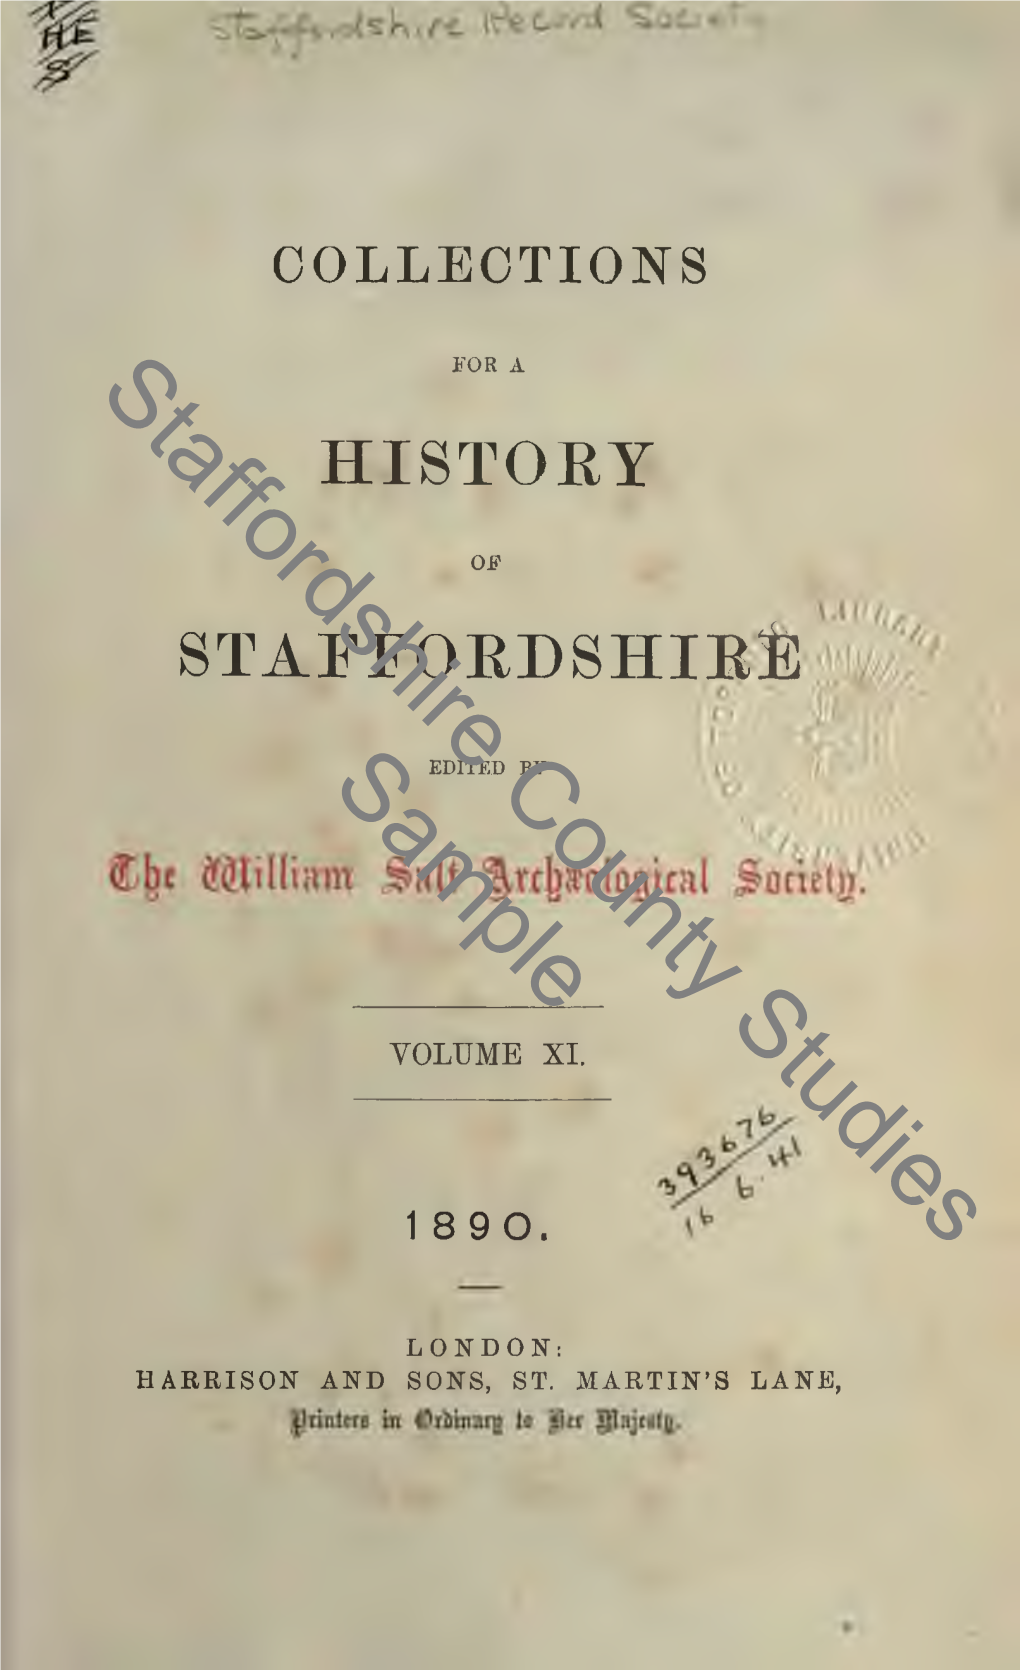 Collections for a History of Staffordshire, 1890